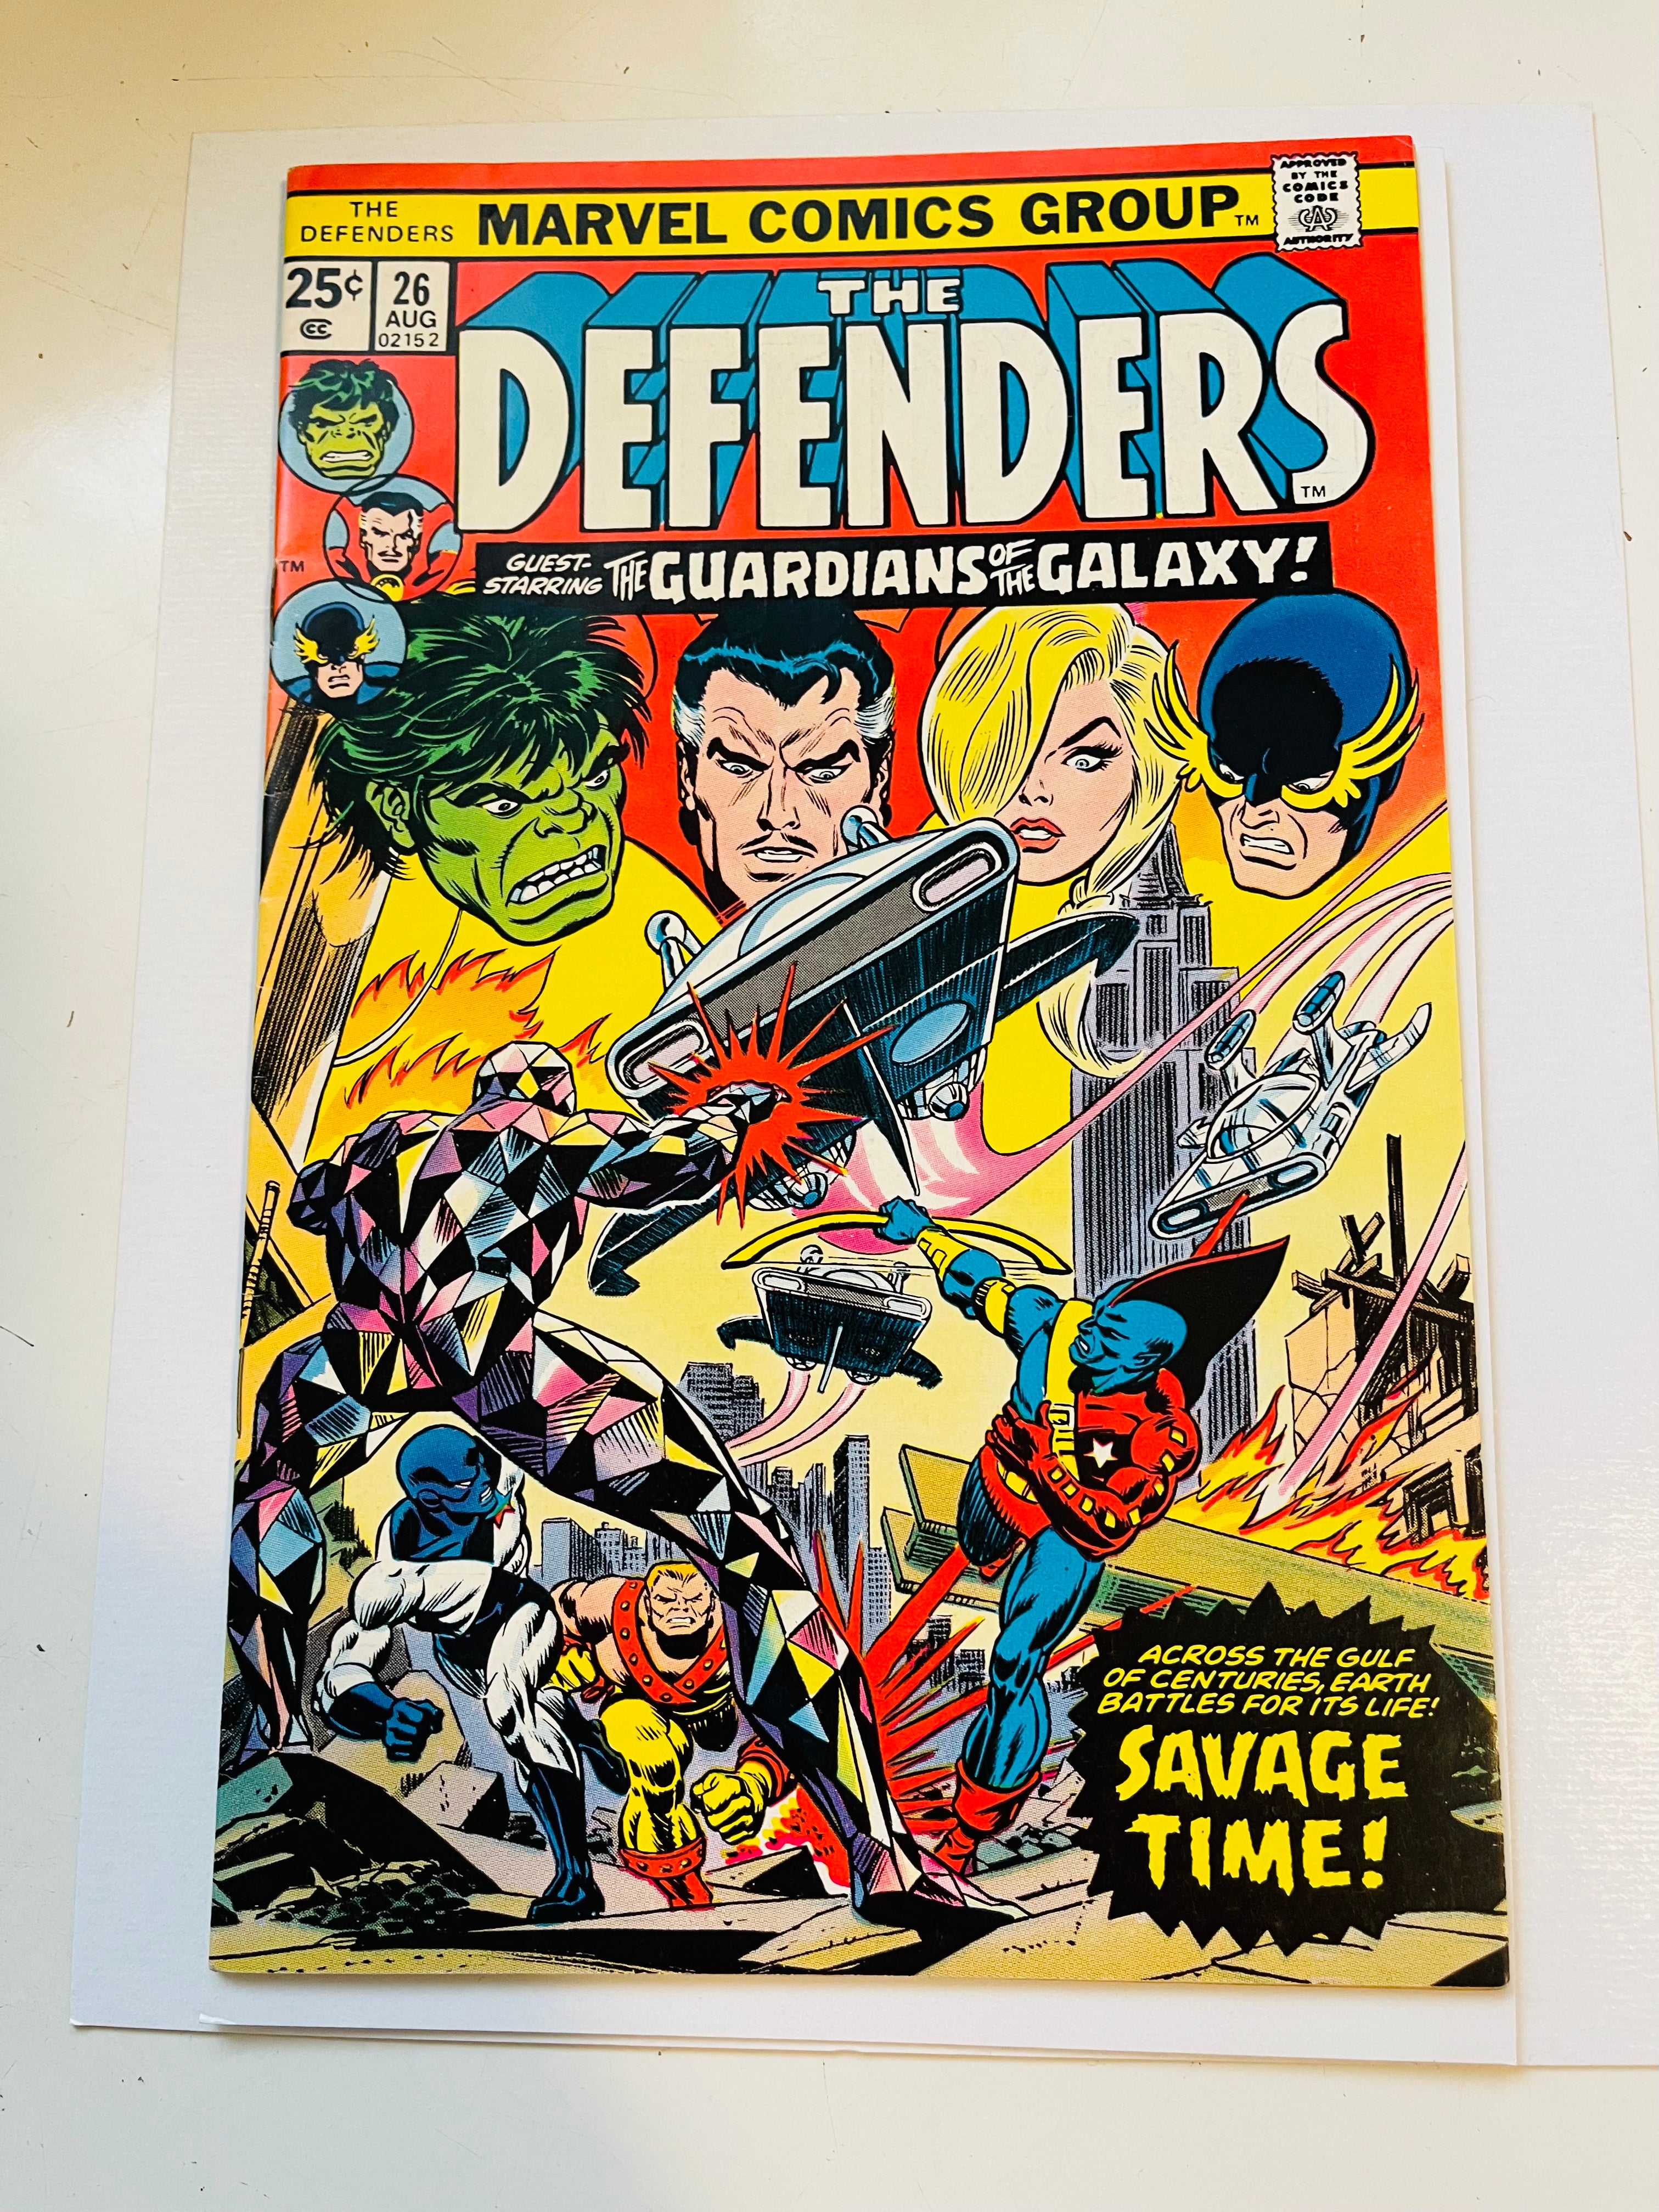 Defenders #26 Guardians of the Galaxy appearance comic